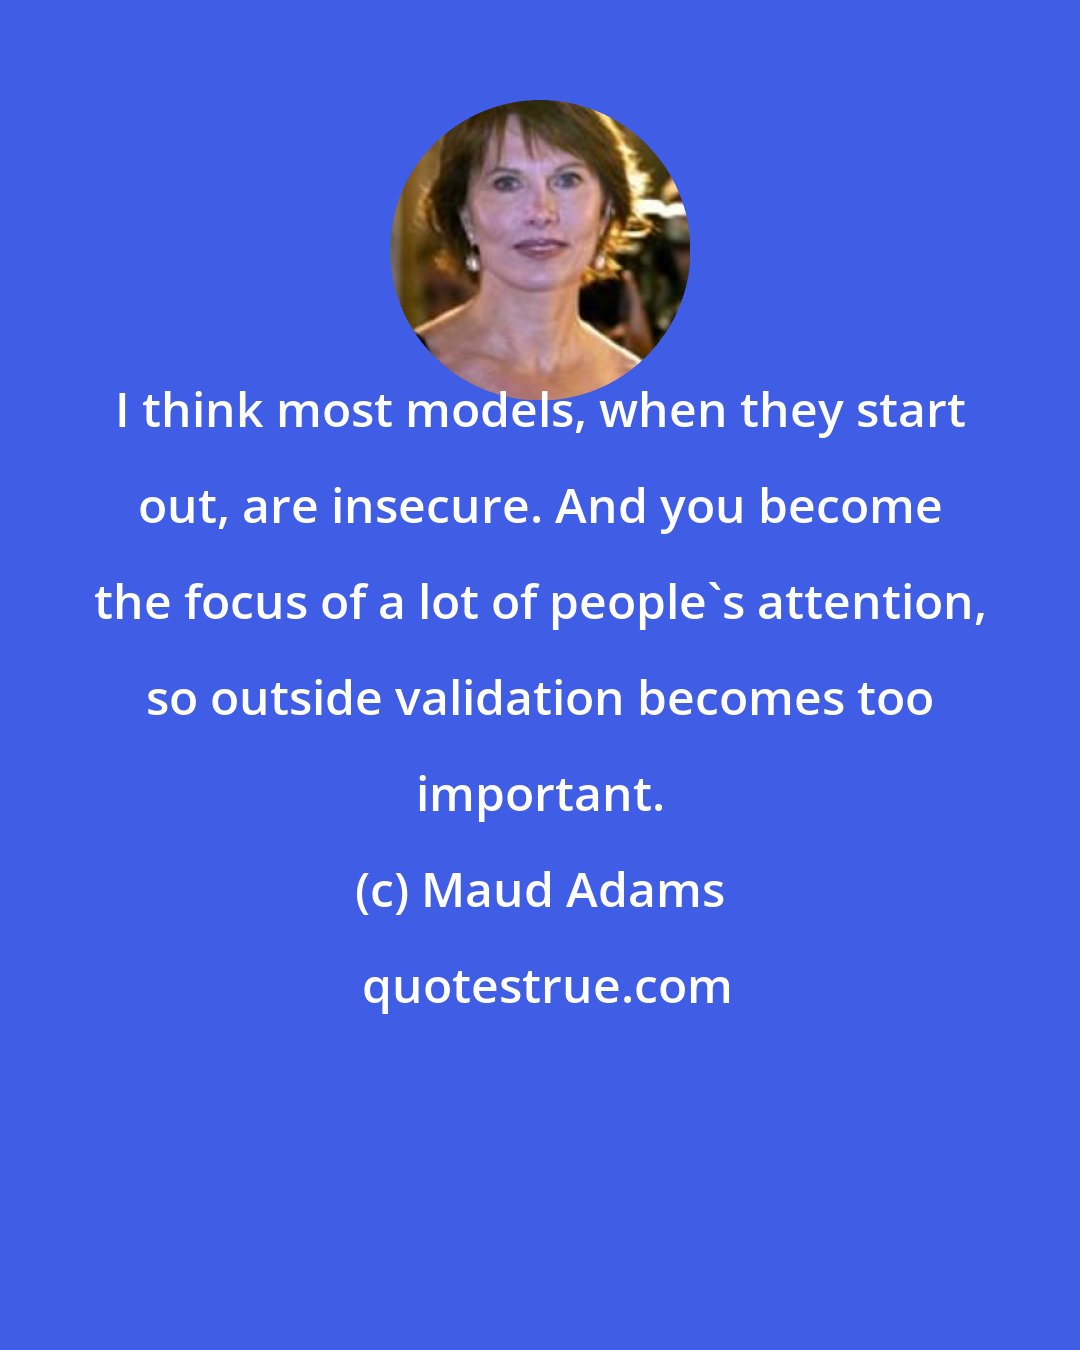 Maud Adams: I think most models, when they start out, are insecure. And you become the focus of a lot of people's attention, so outside validation becomes too important.